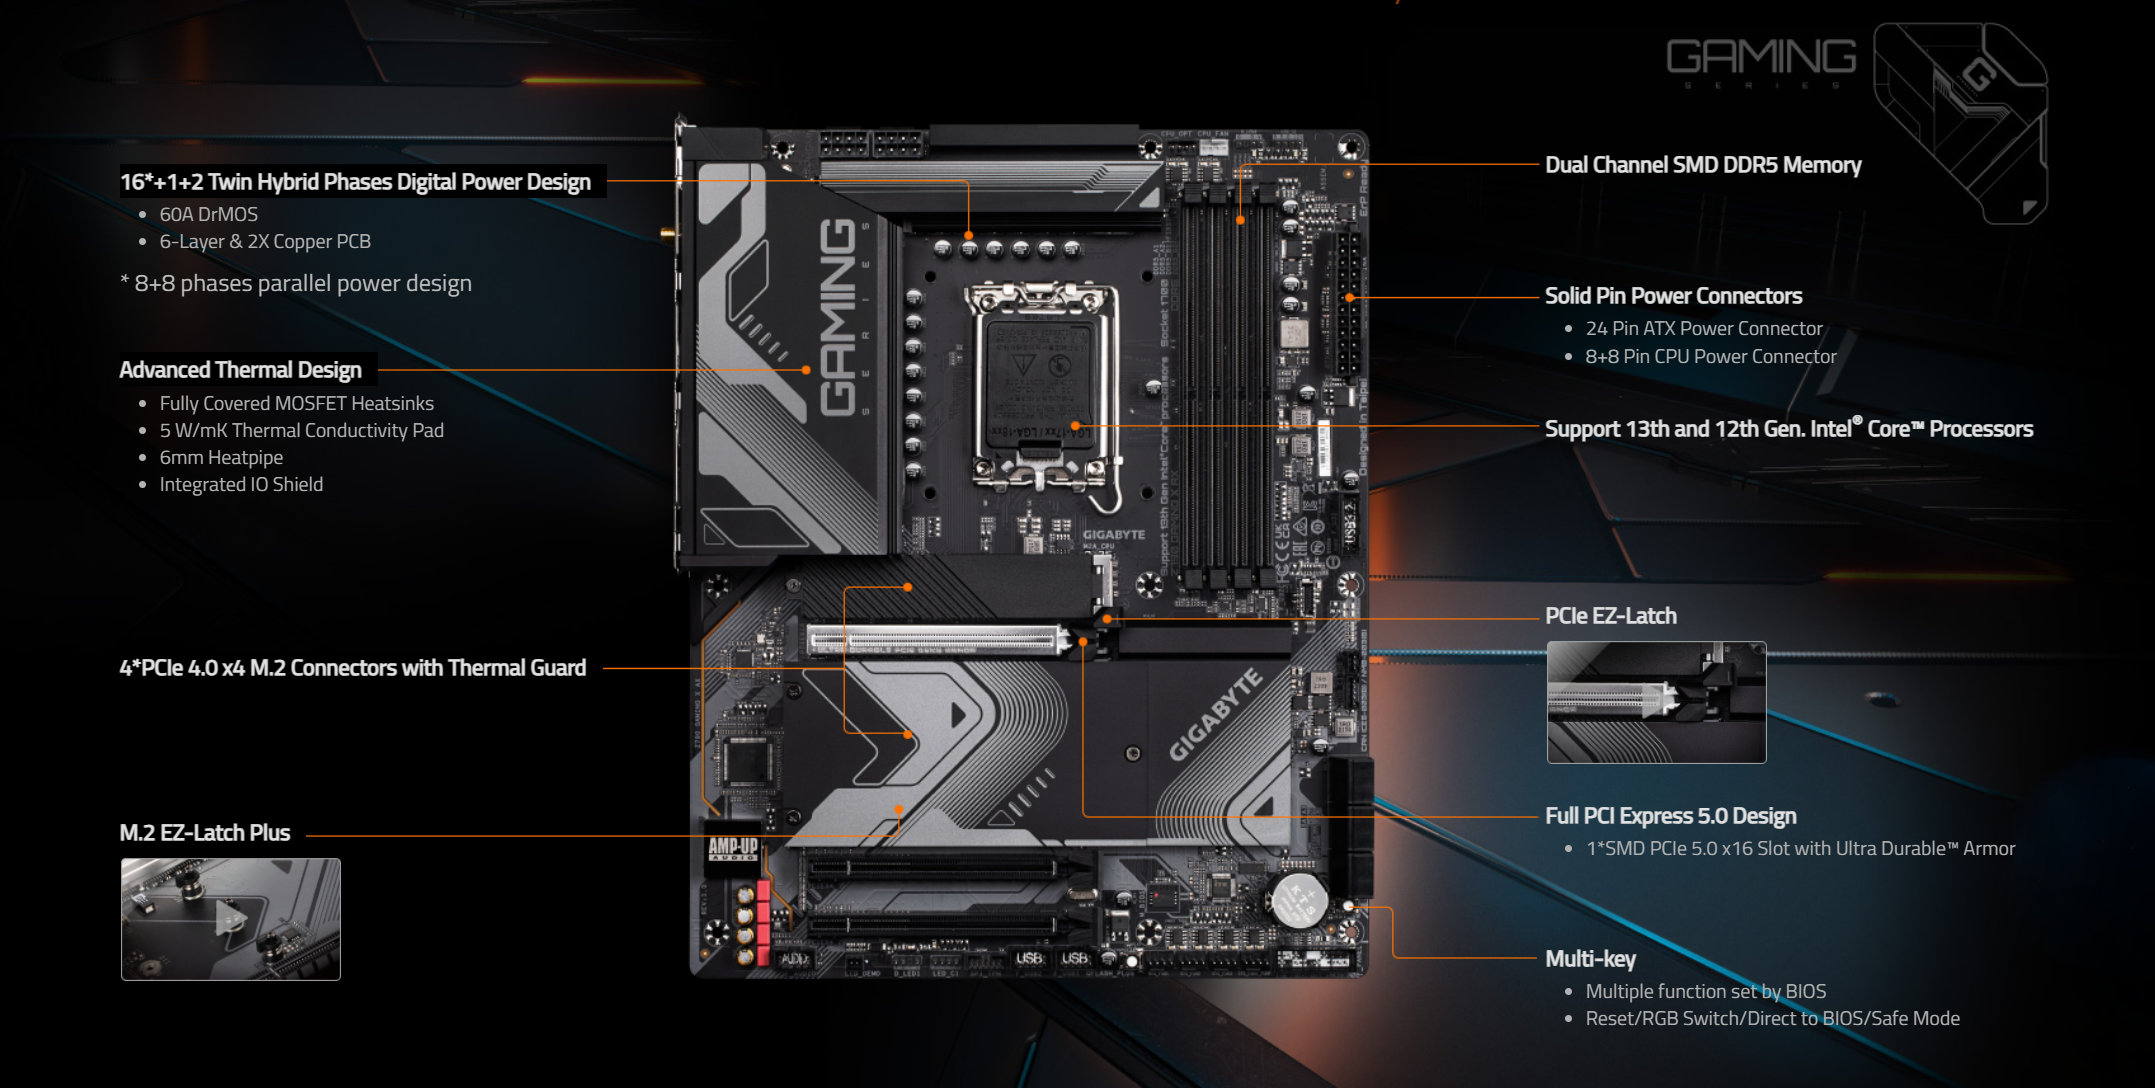 Building a new PC: a “gaming” motherboard may be an option